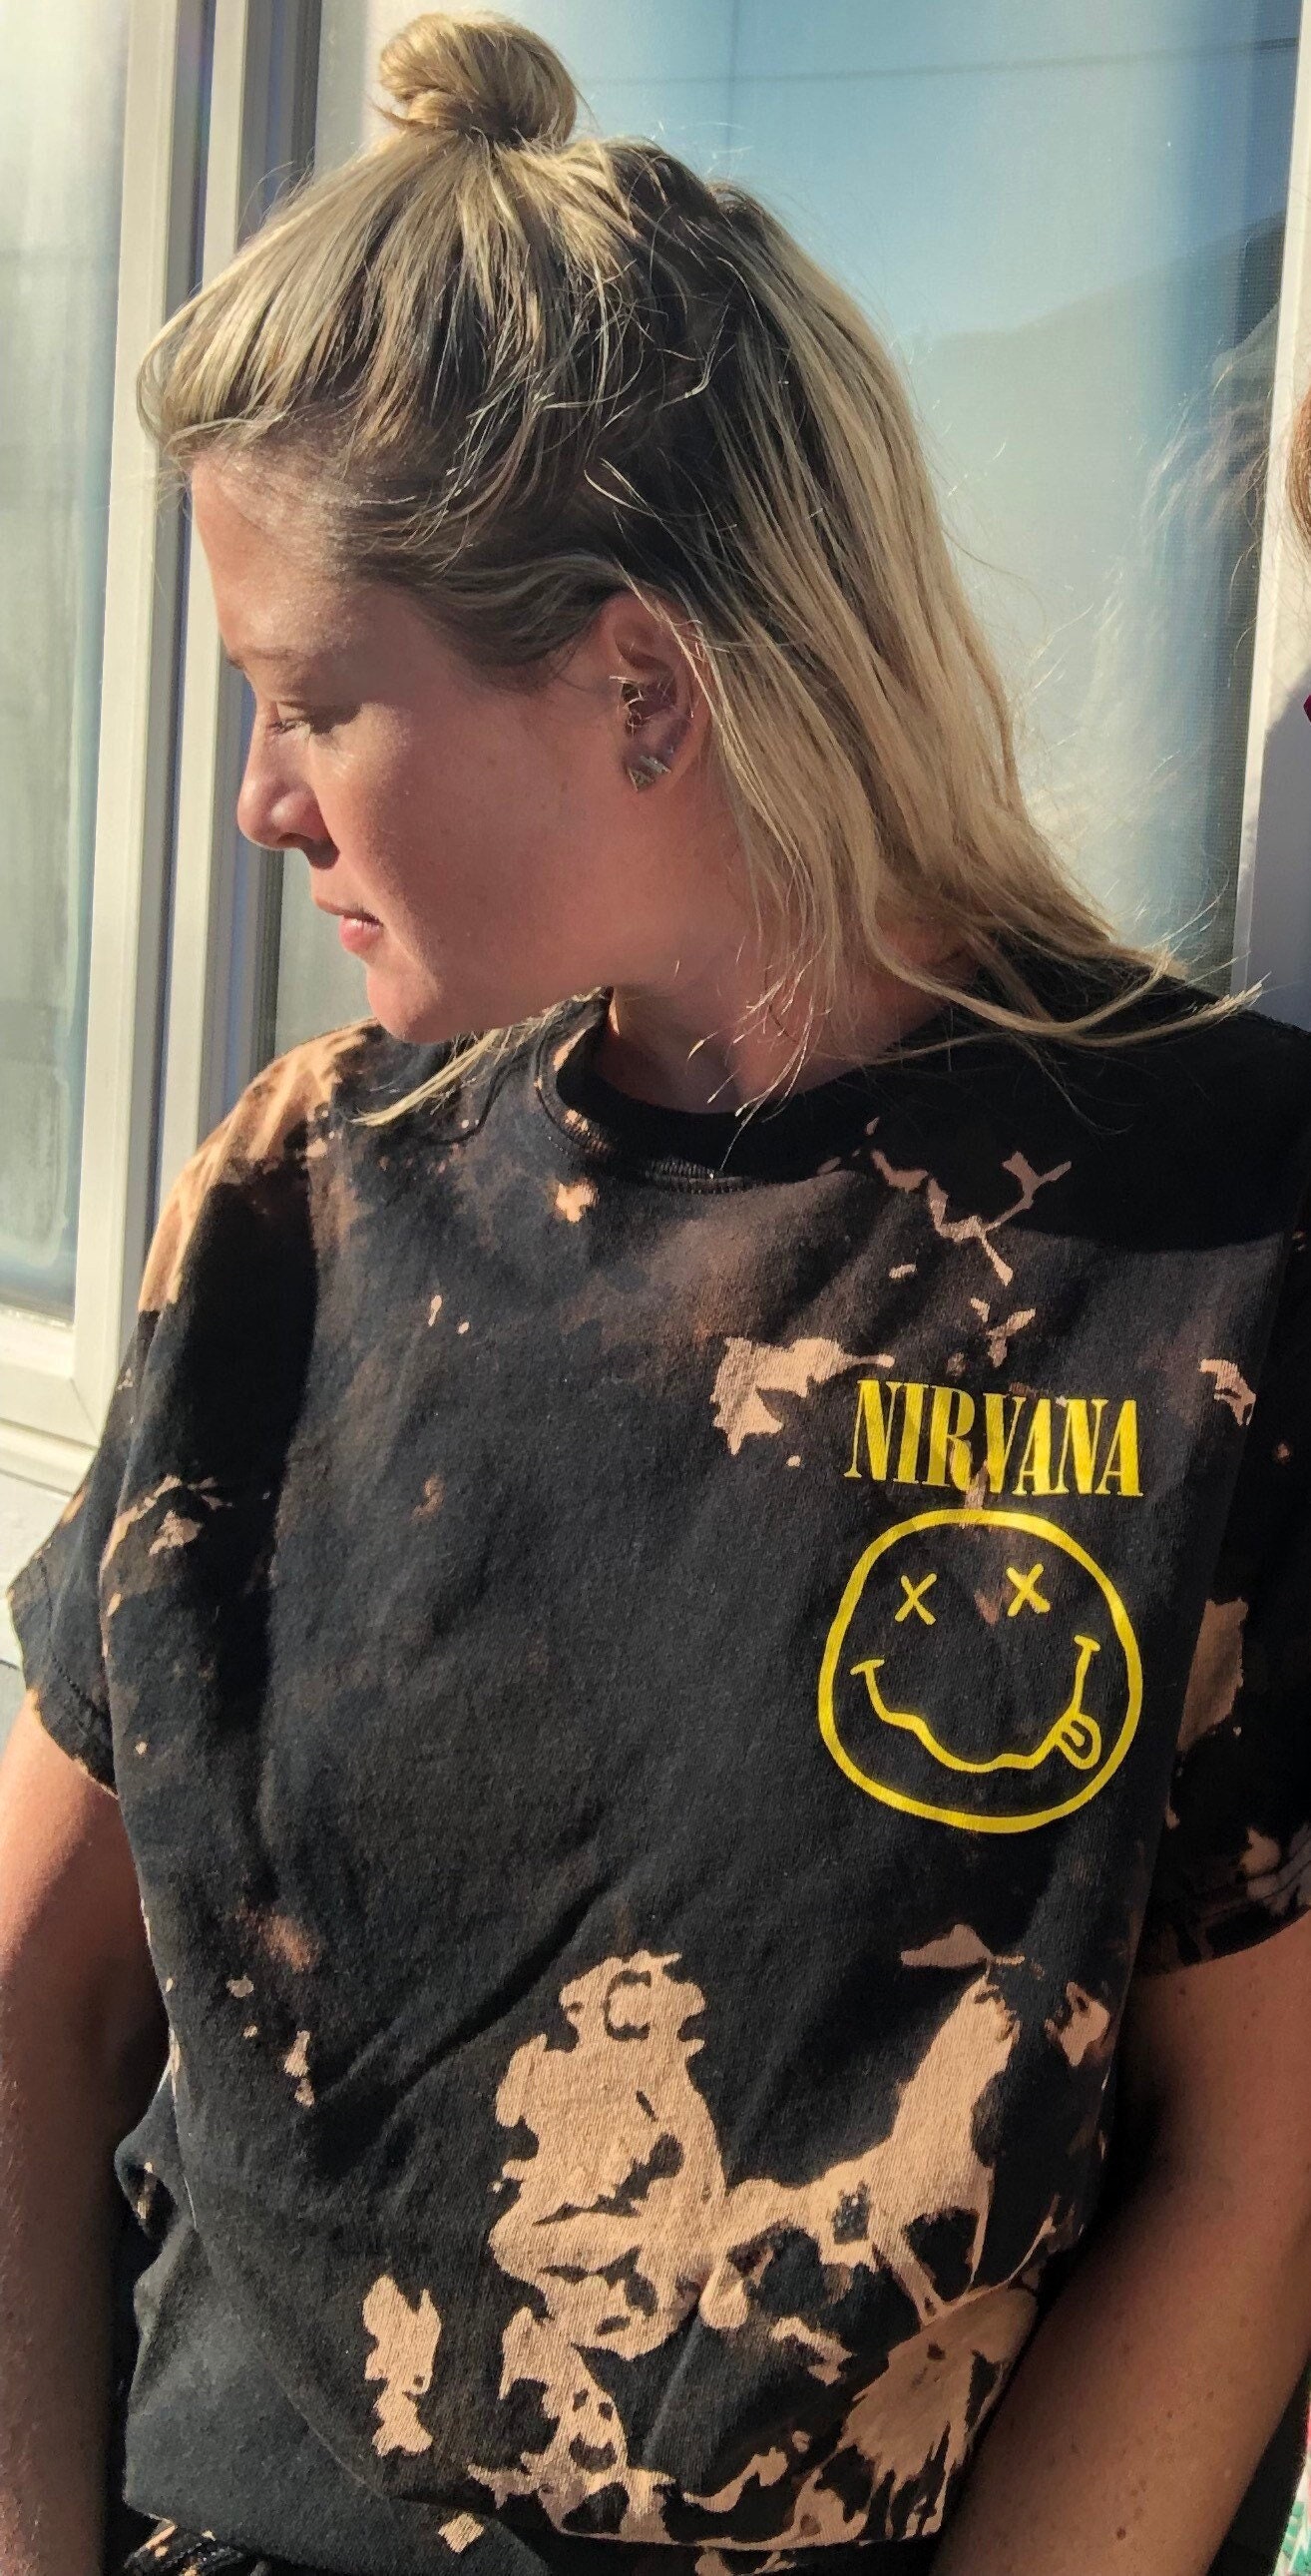 Nirvana Cropped Graphic Band T-Shirt